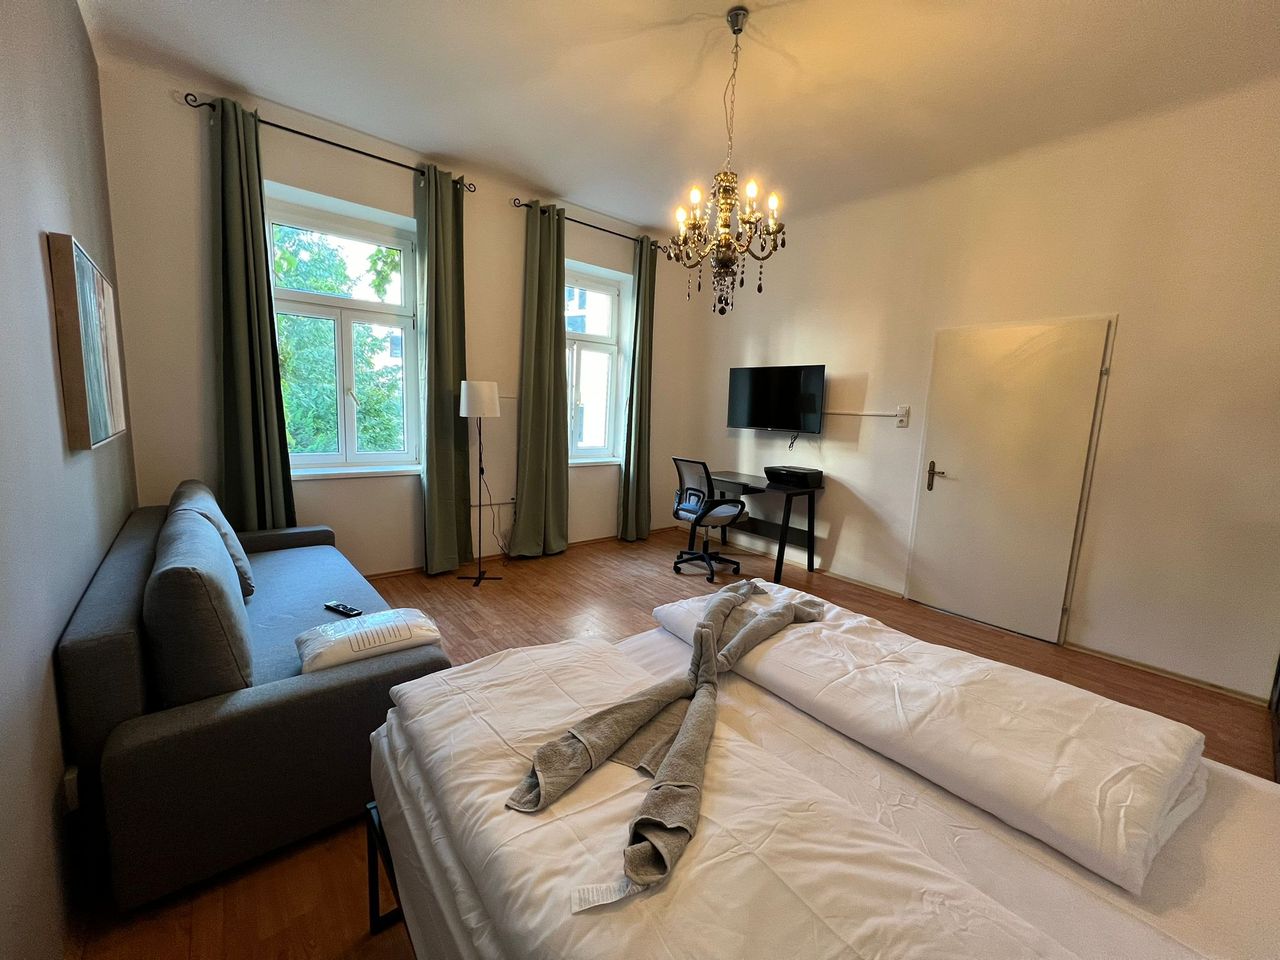 Enjoy The Danube and Prater Stern from Our 1BR Gem